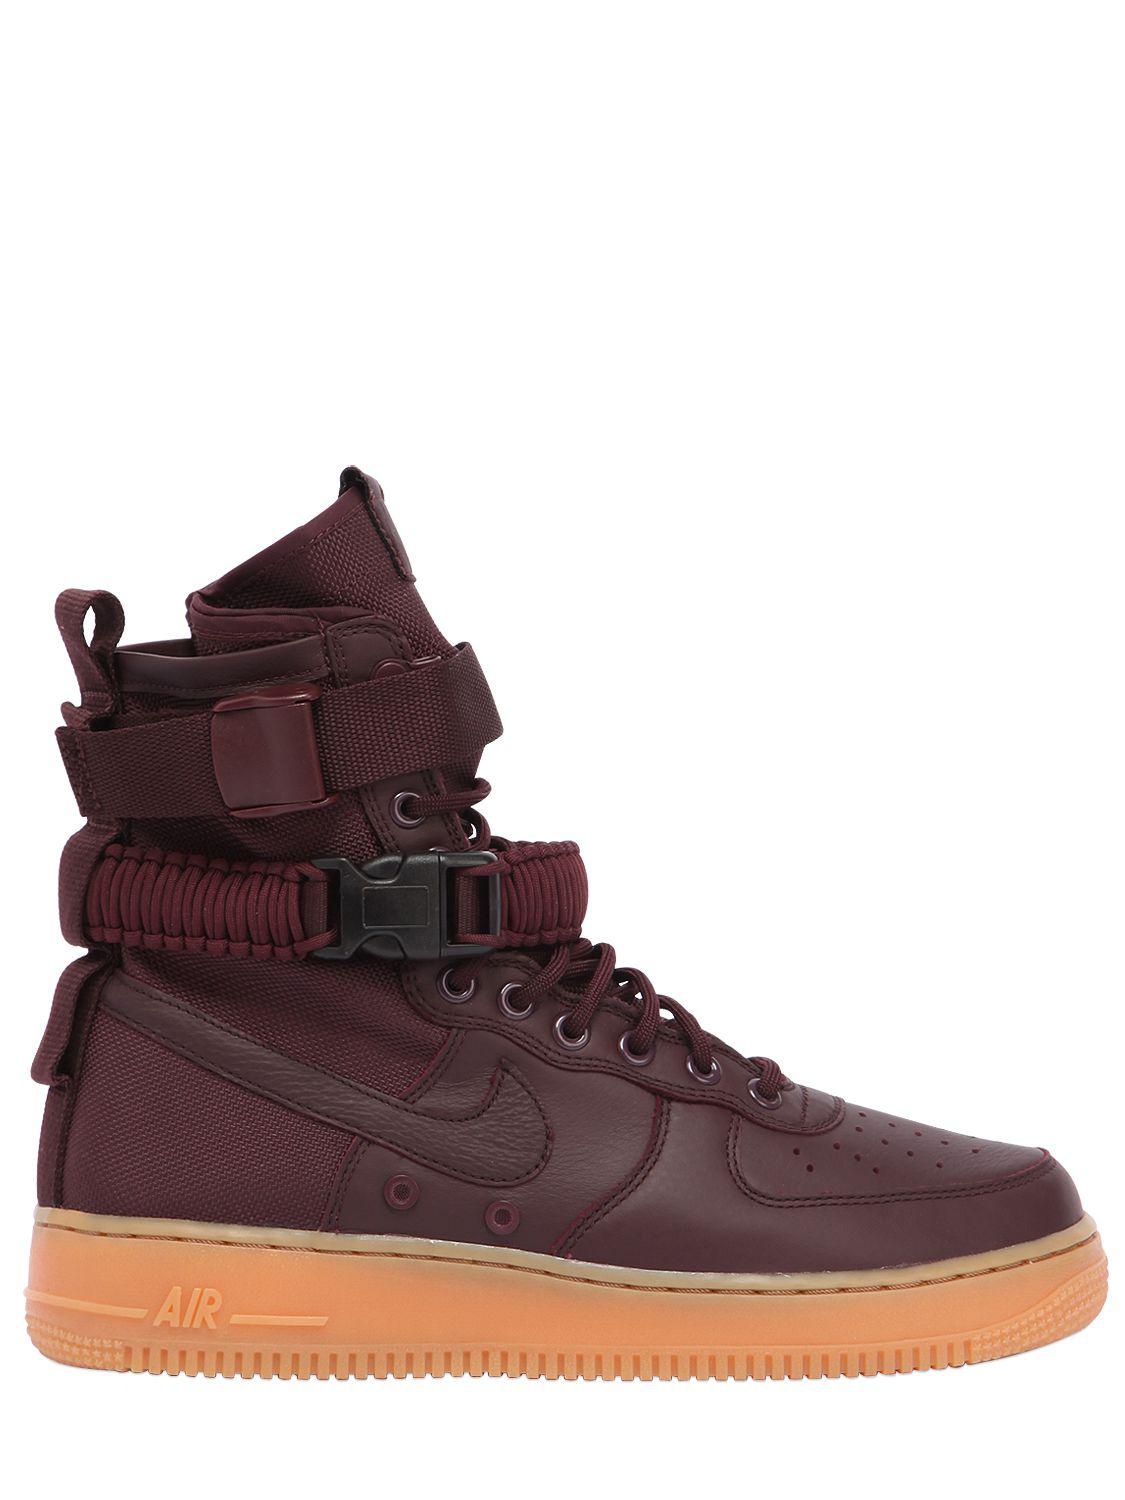 Nike Leather Sf Air Force 1 High Top Sneakers for Men - Lyst